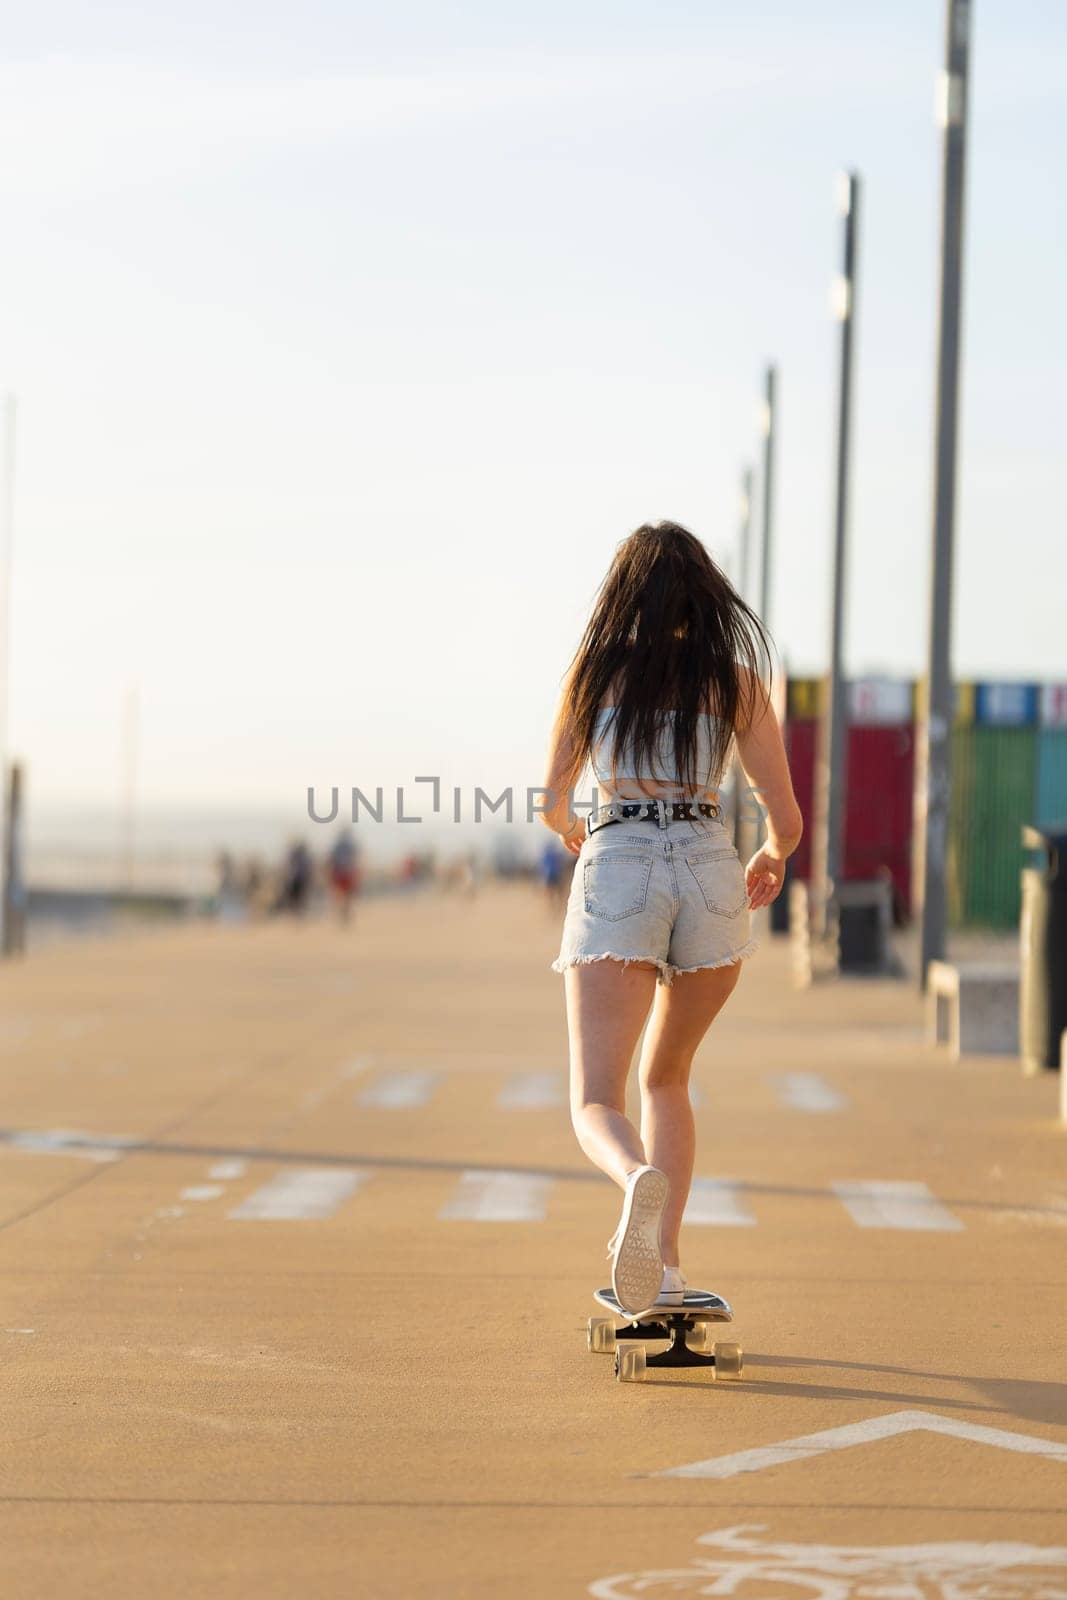 A woman is skateboarding down a sidewalk. She is wearing shorts and a white shirt. The scene is sunny and bright